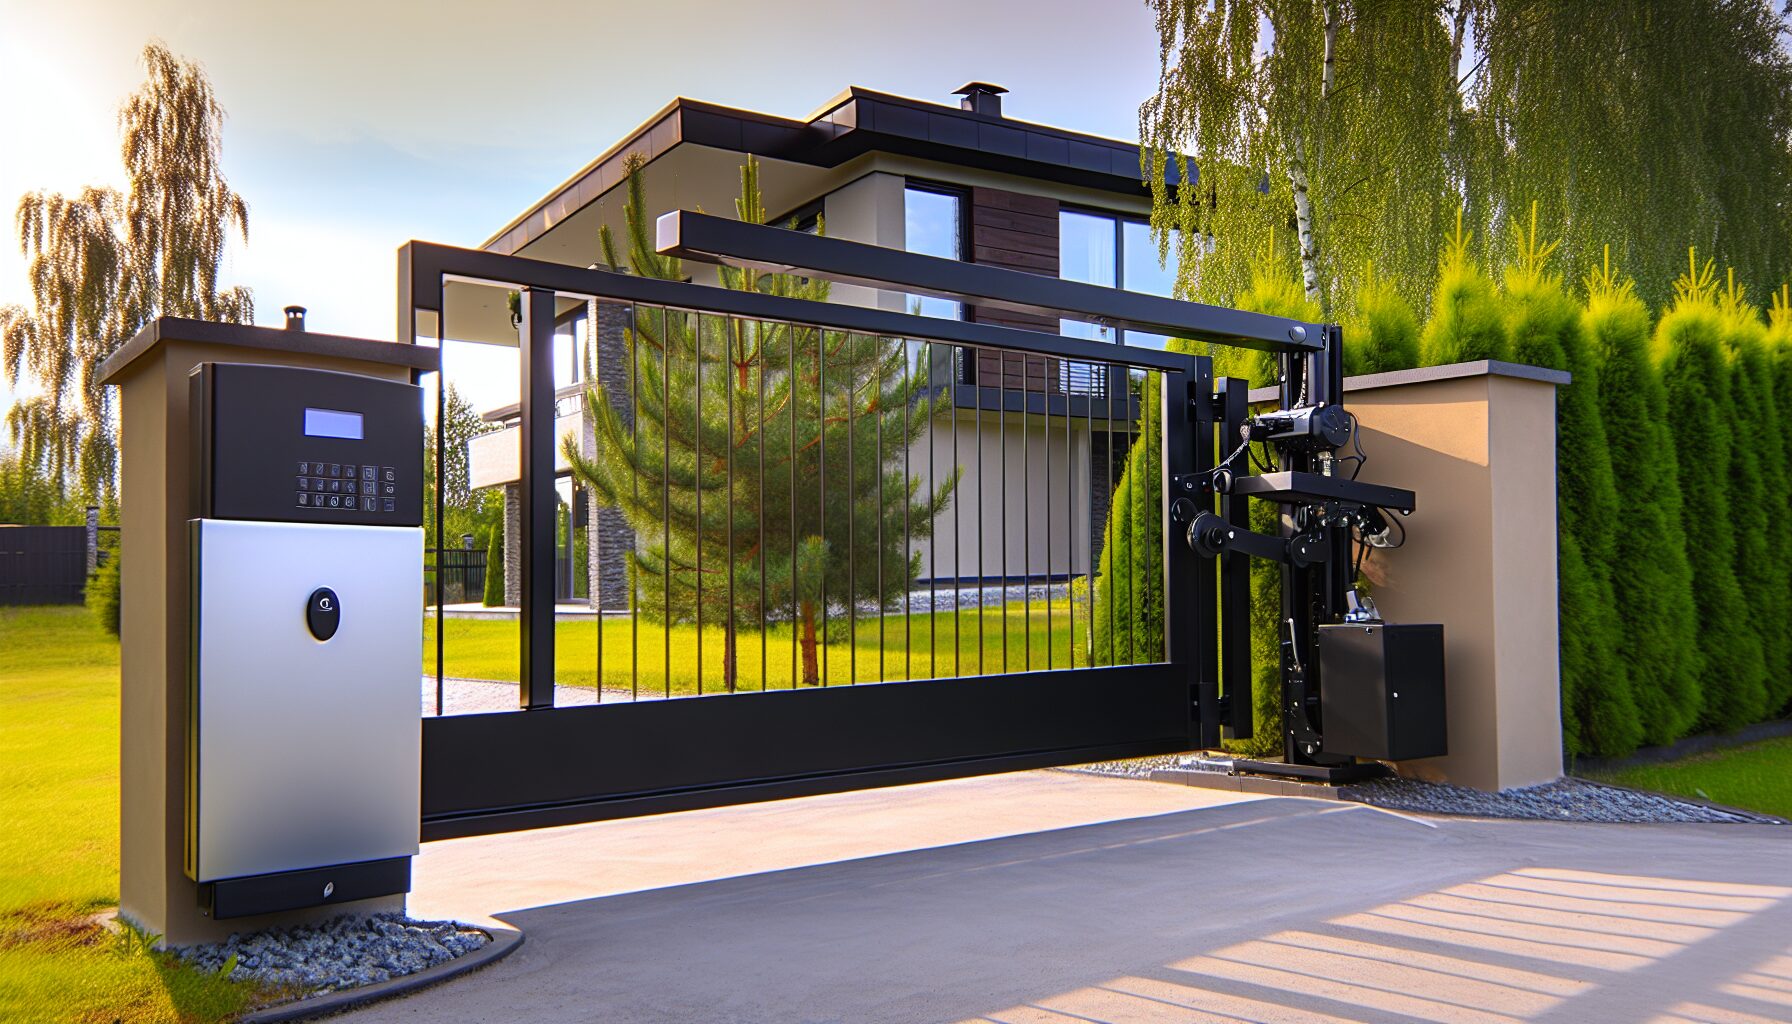 Customized gate opener system for unique needs using Automated Gate Motors